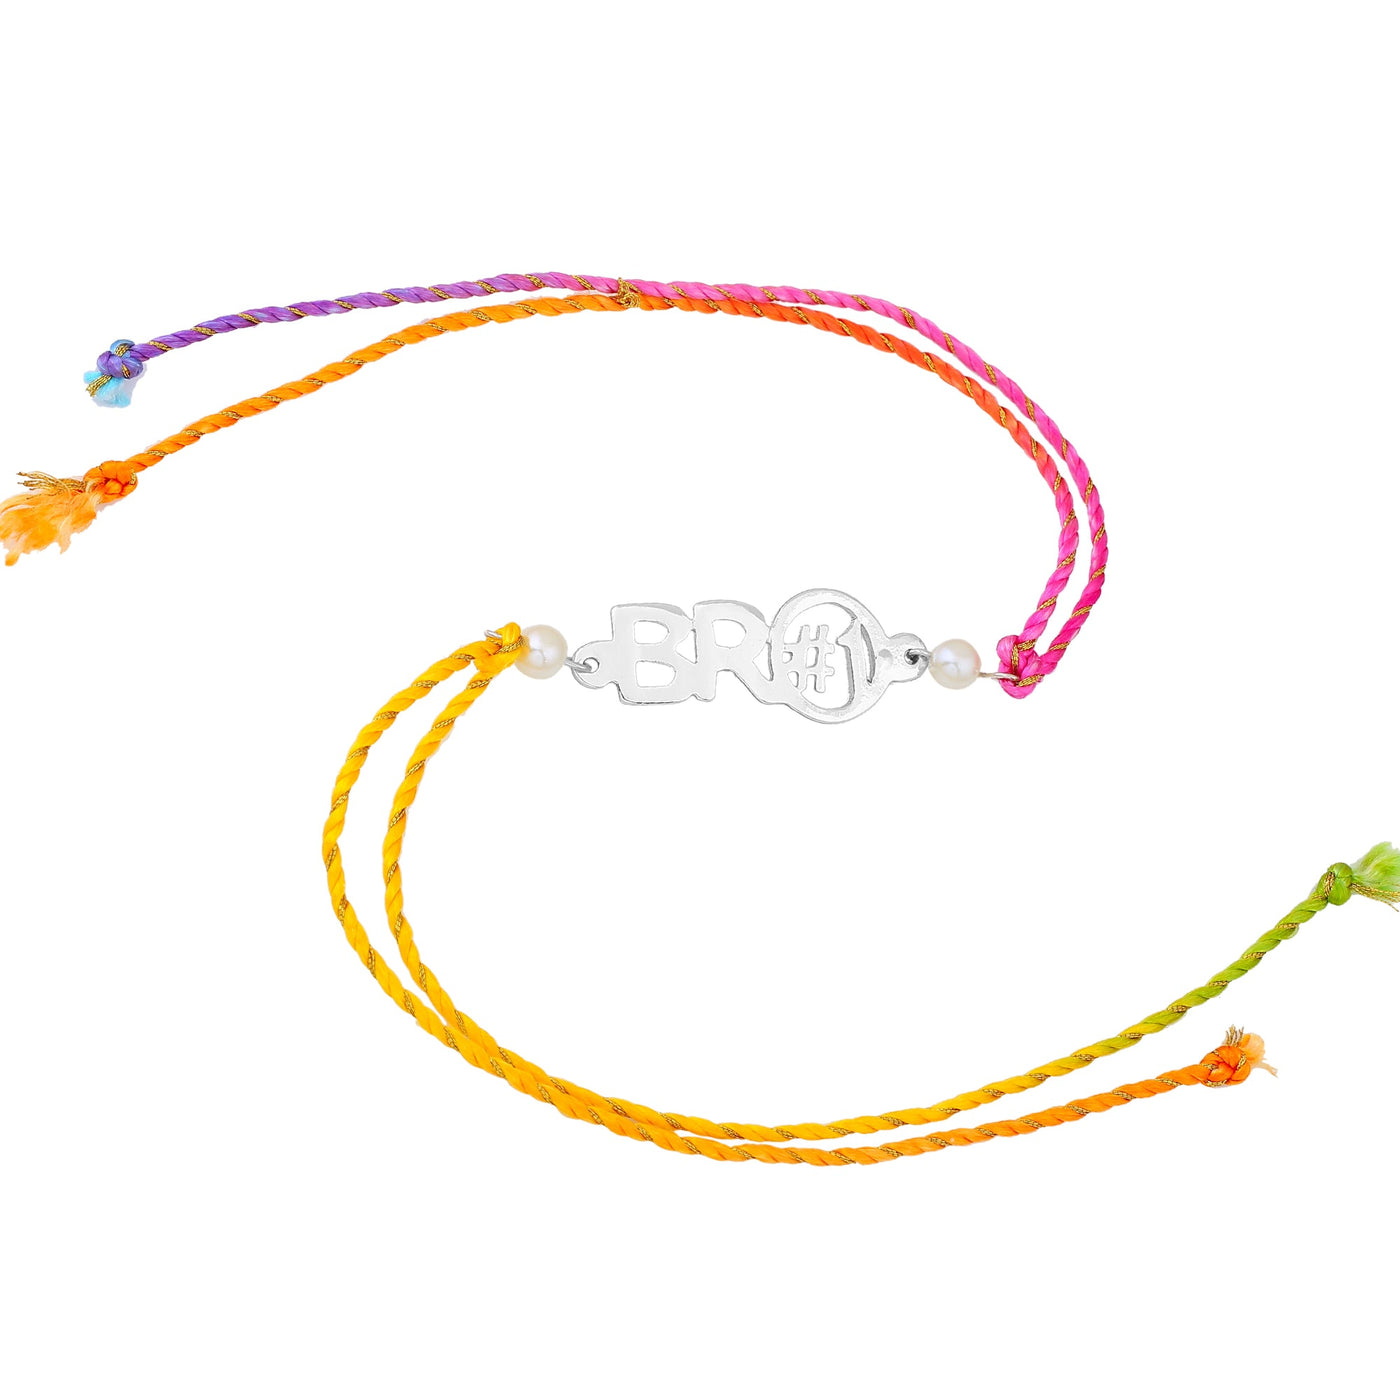 Estele Rhodium Plated Designer Bro#1 Rakhi with Pearls and Multi-Colored Silk Thread for Men's, Boy's and Kid's